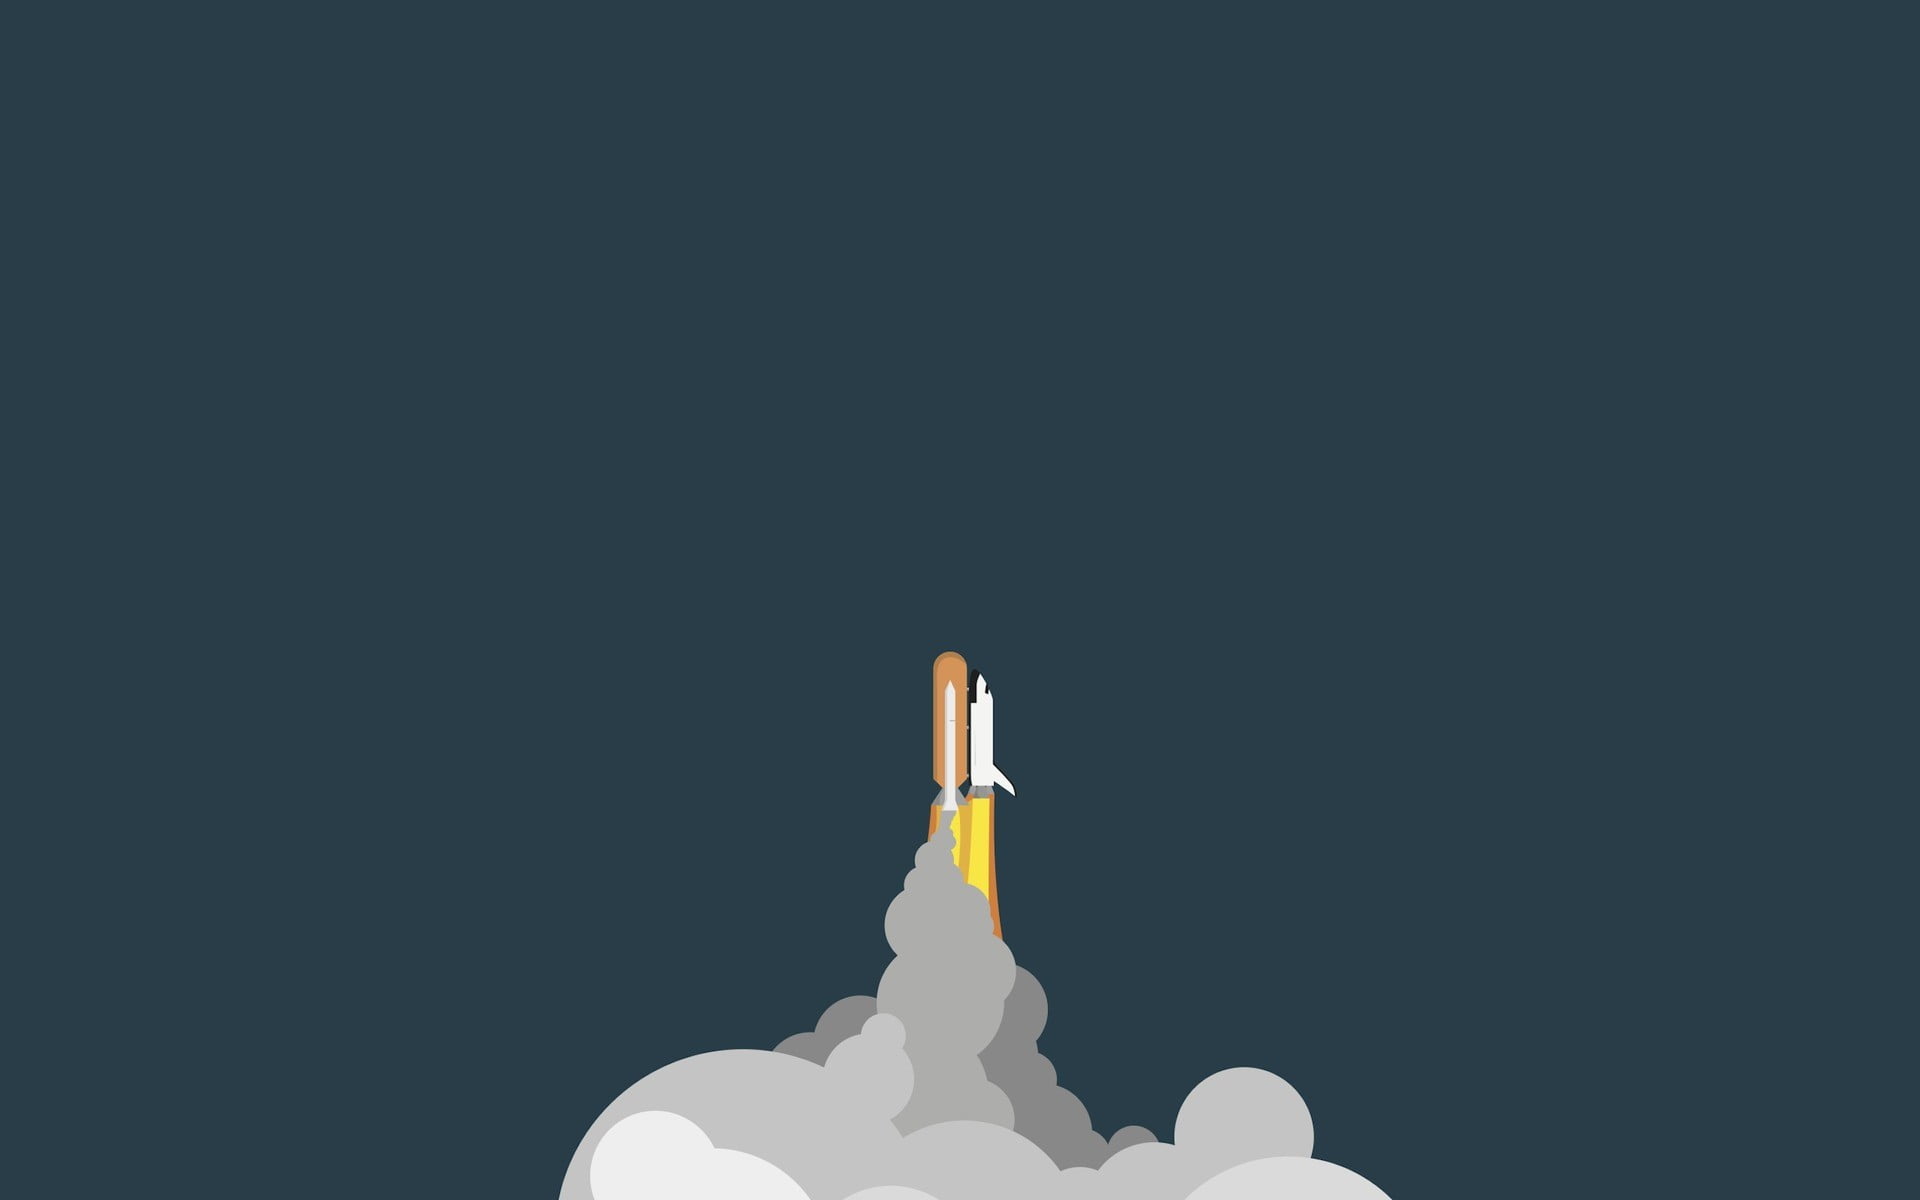 Rocket launching animated illustration, spaceship, simple, space